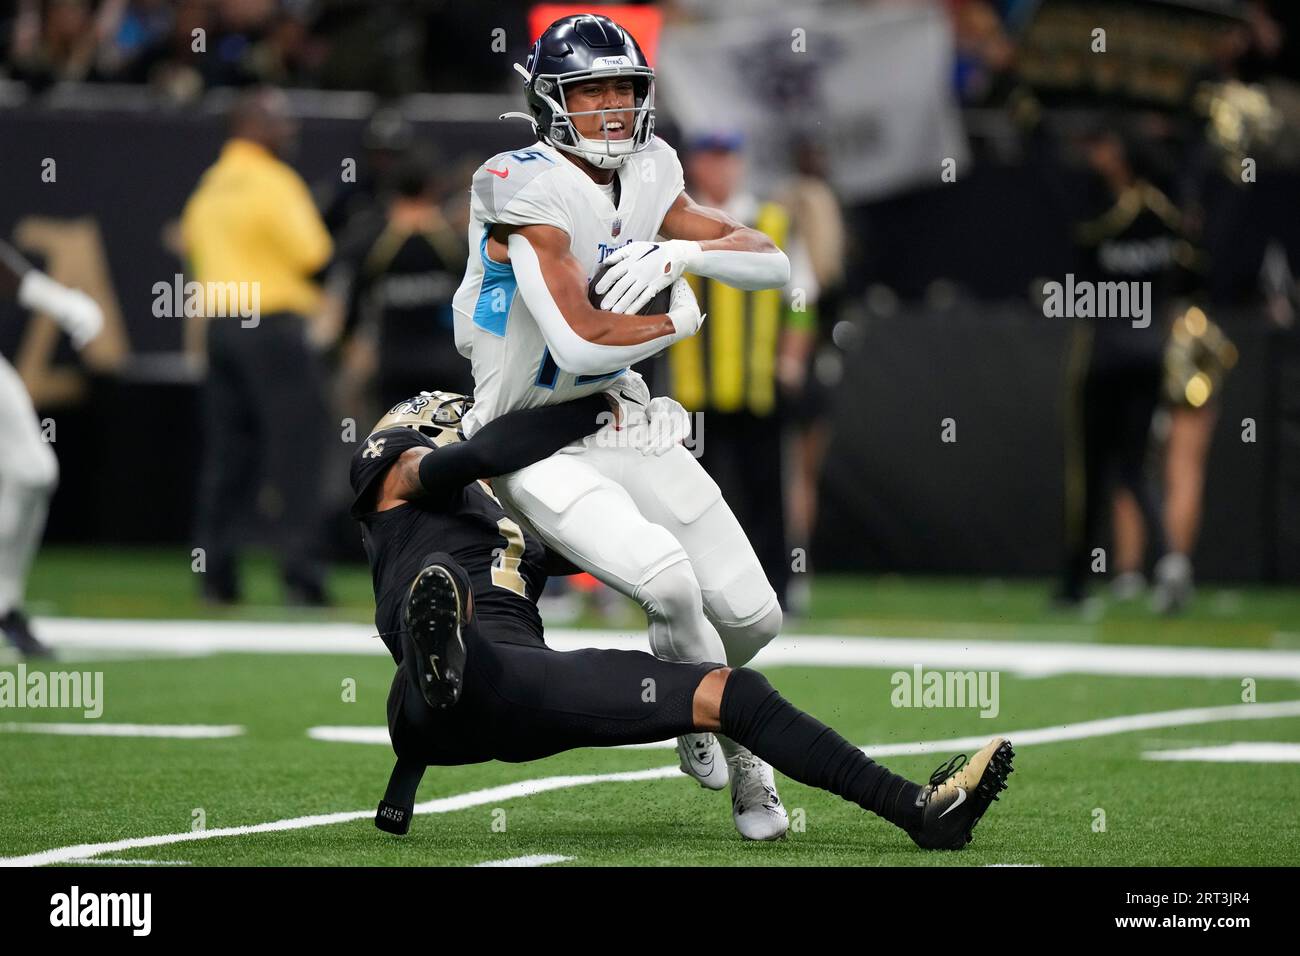 New Orleans Saints cornerback Alontae Taylor, left, tackles Tennessee  Titans wide receiver Nick Westbrook-Ikhine, right, after a catch in the  first half of an NFL football game in New Orleans, Sunday, Sept.